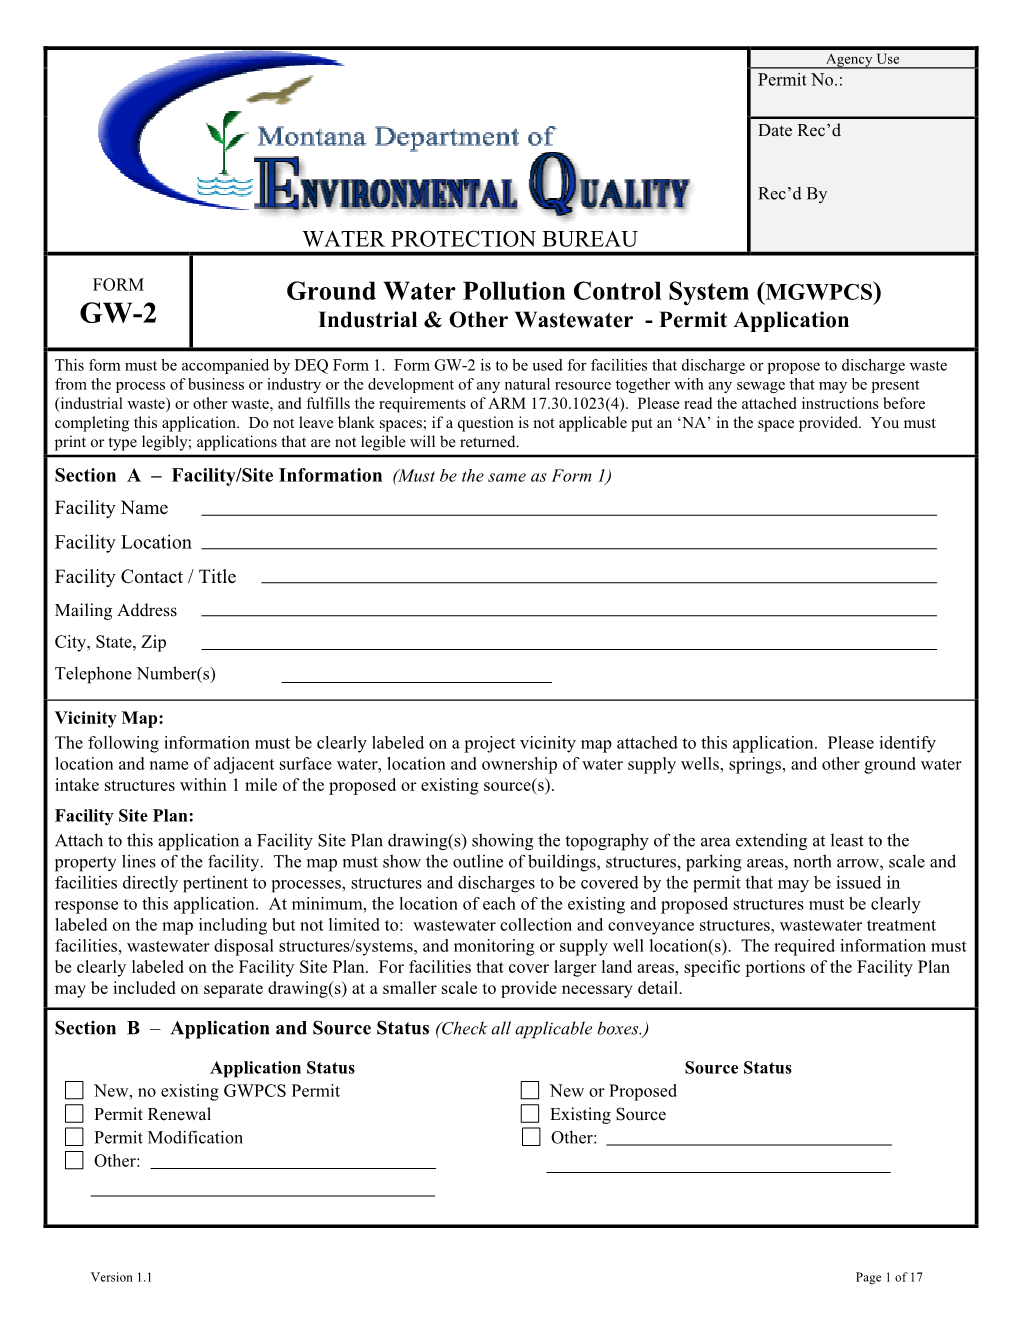 GW-2 Industrial & Other Wastewater - Permit Application